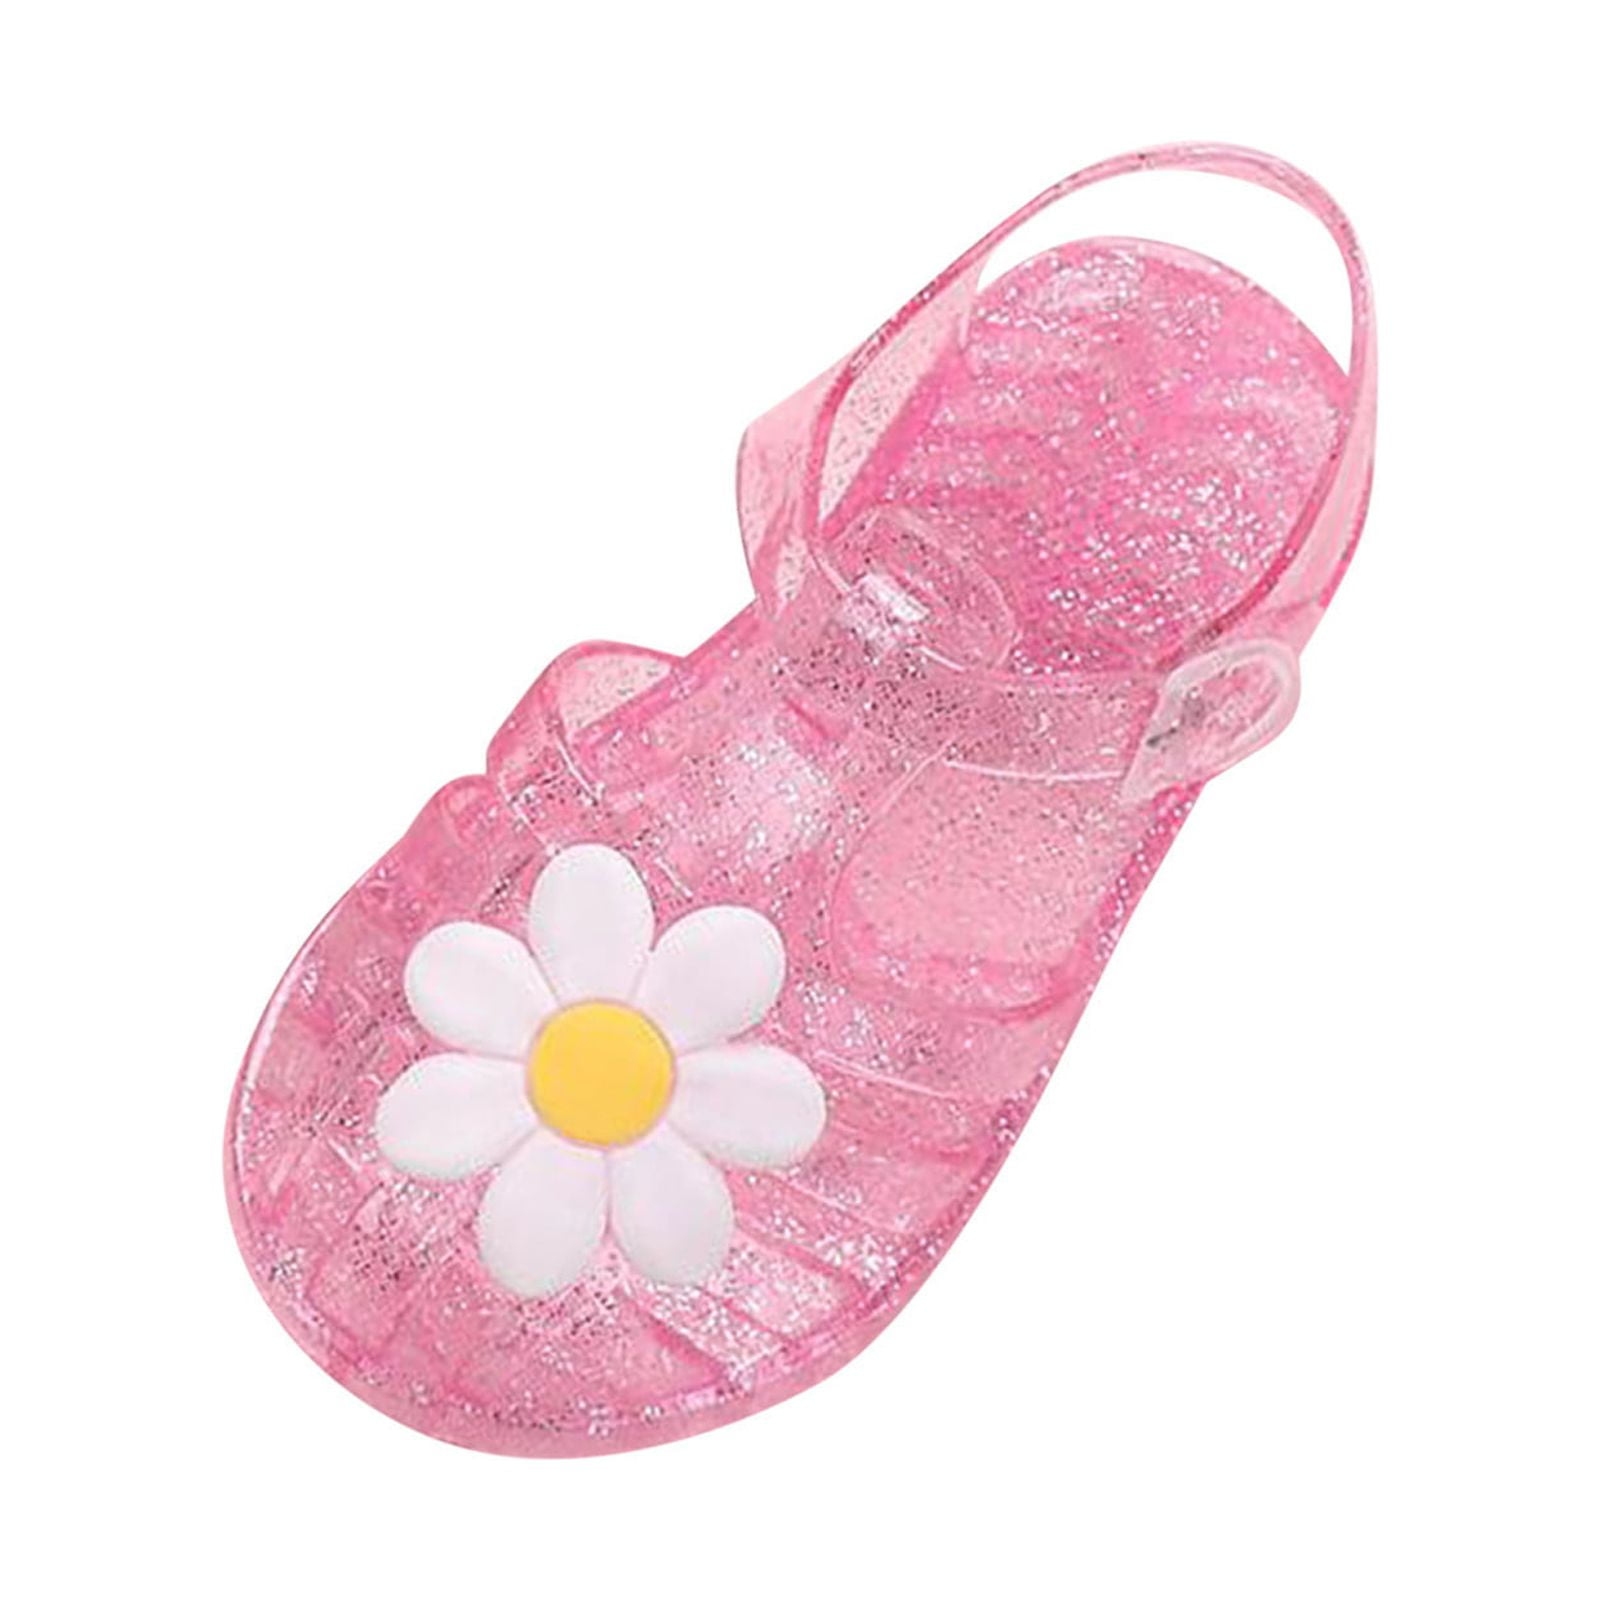 Lovskoo Little Girls Jelly Sandal for 7-8 Years Old Hollow Out Non-slip  Cute Fruit Soft Sole Beach Roman Sandals Pink 